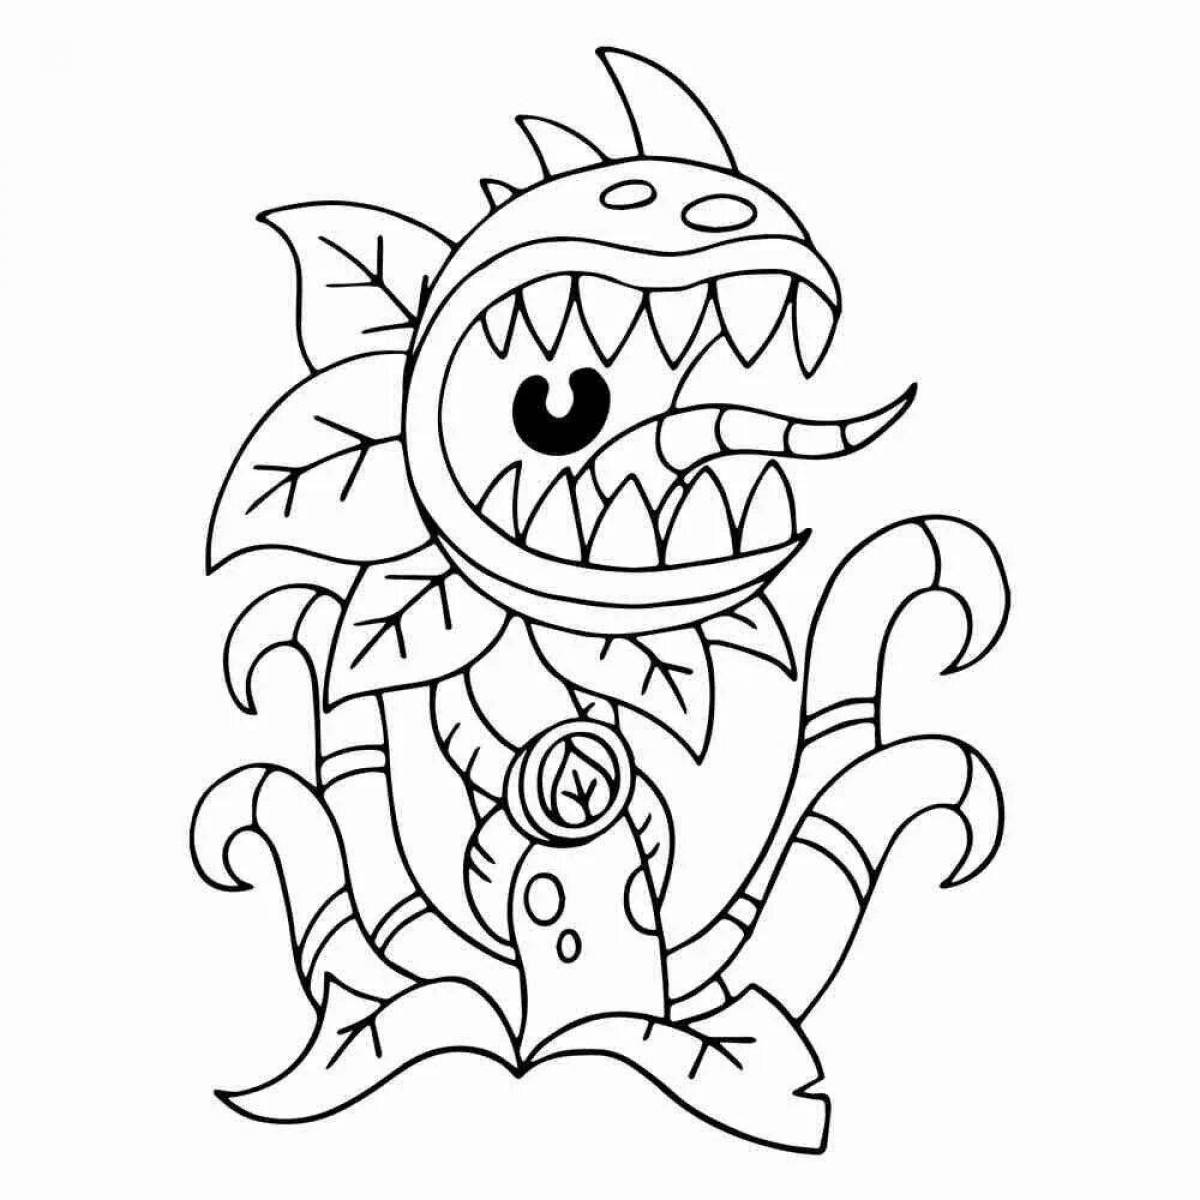 Grand plants vs zombies 1 plant coloring page